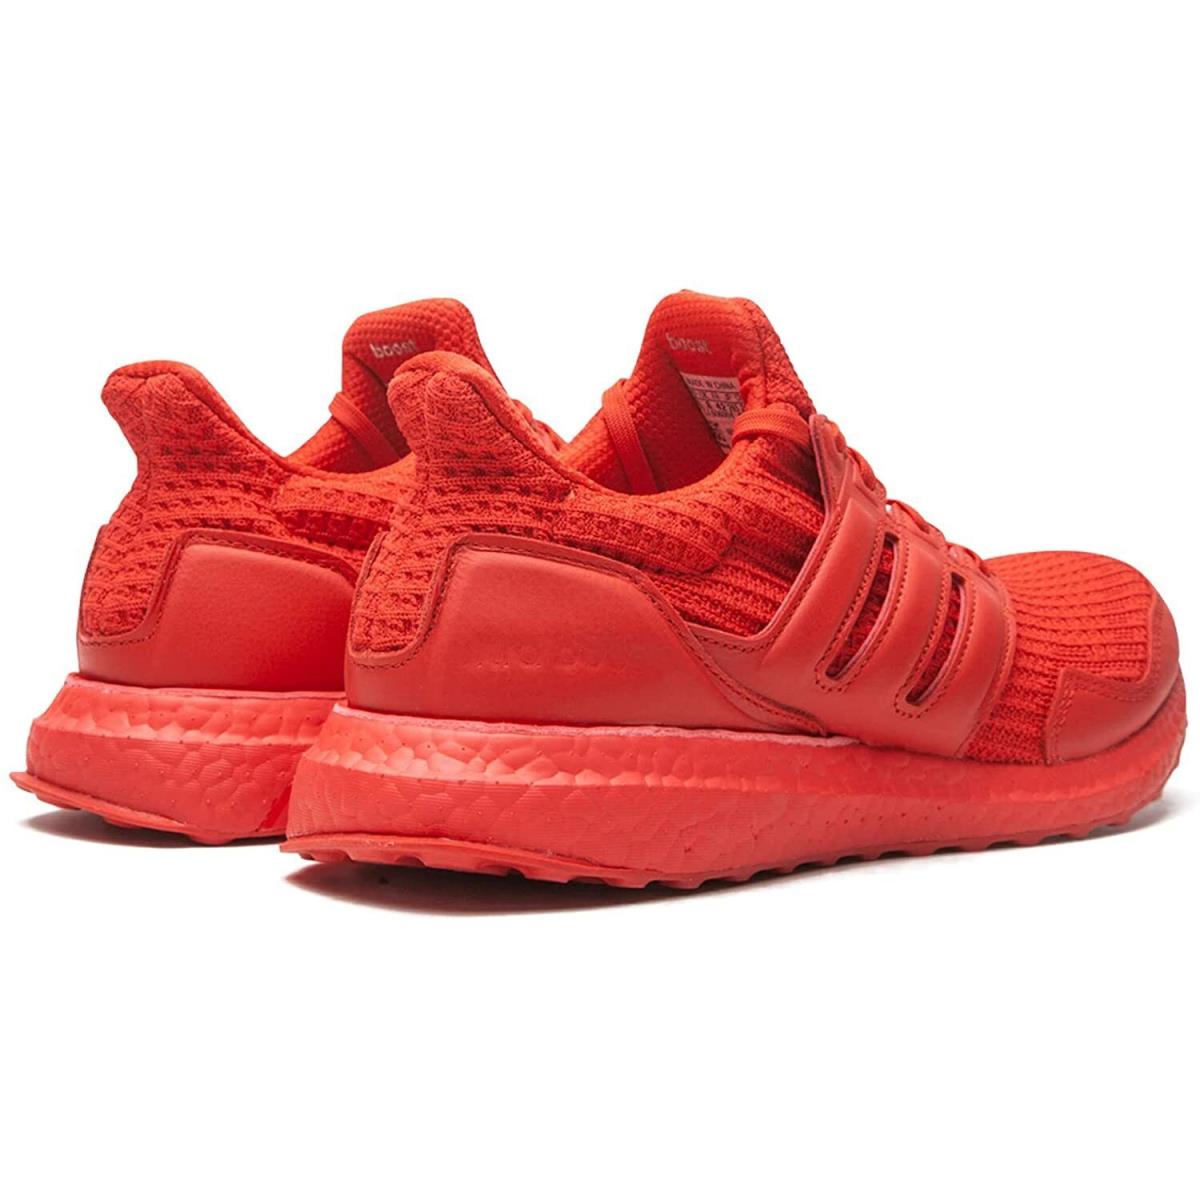 Adidas shoes UltraBoost DNA - Red 2